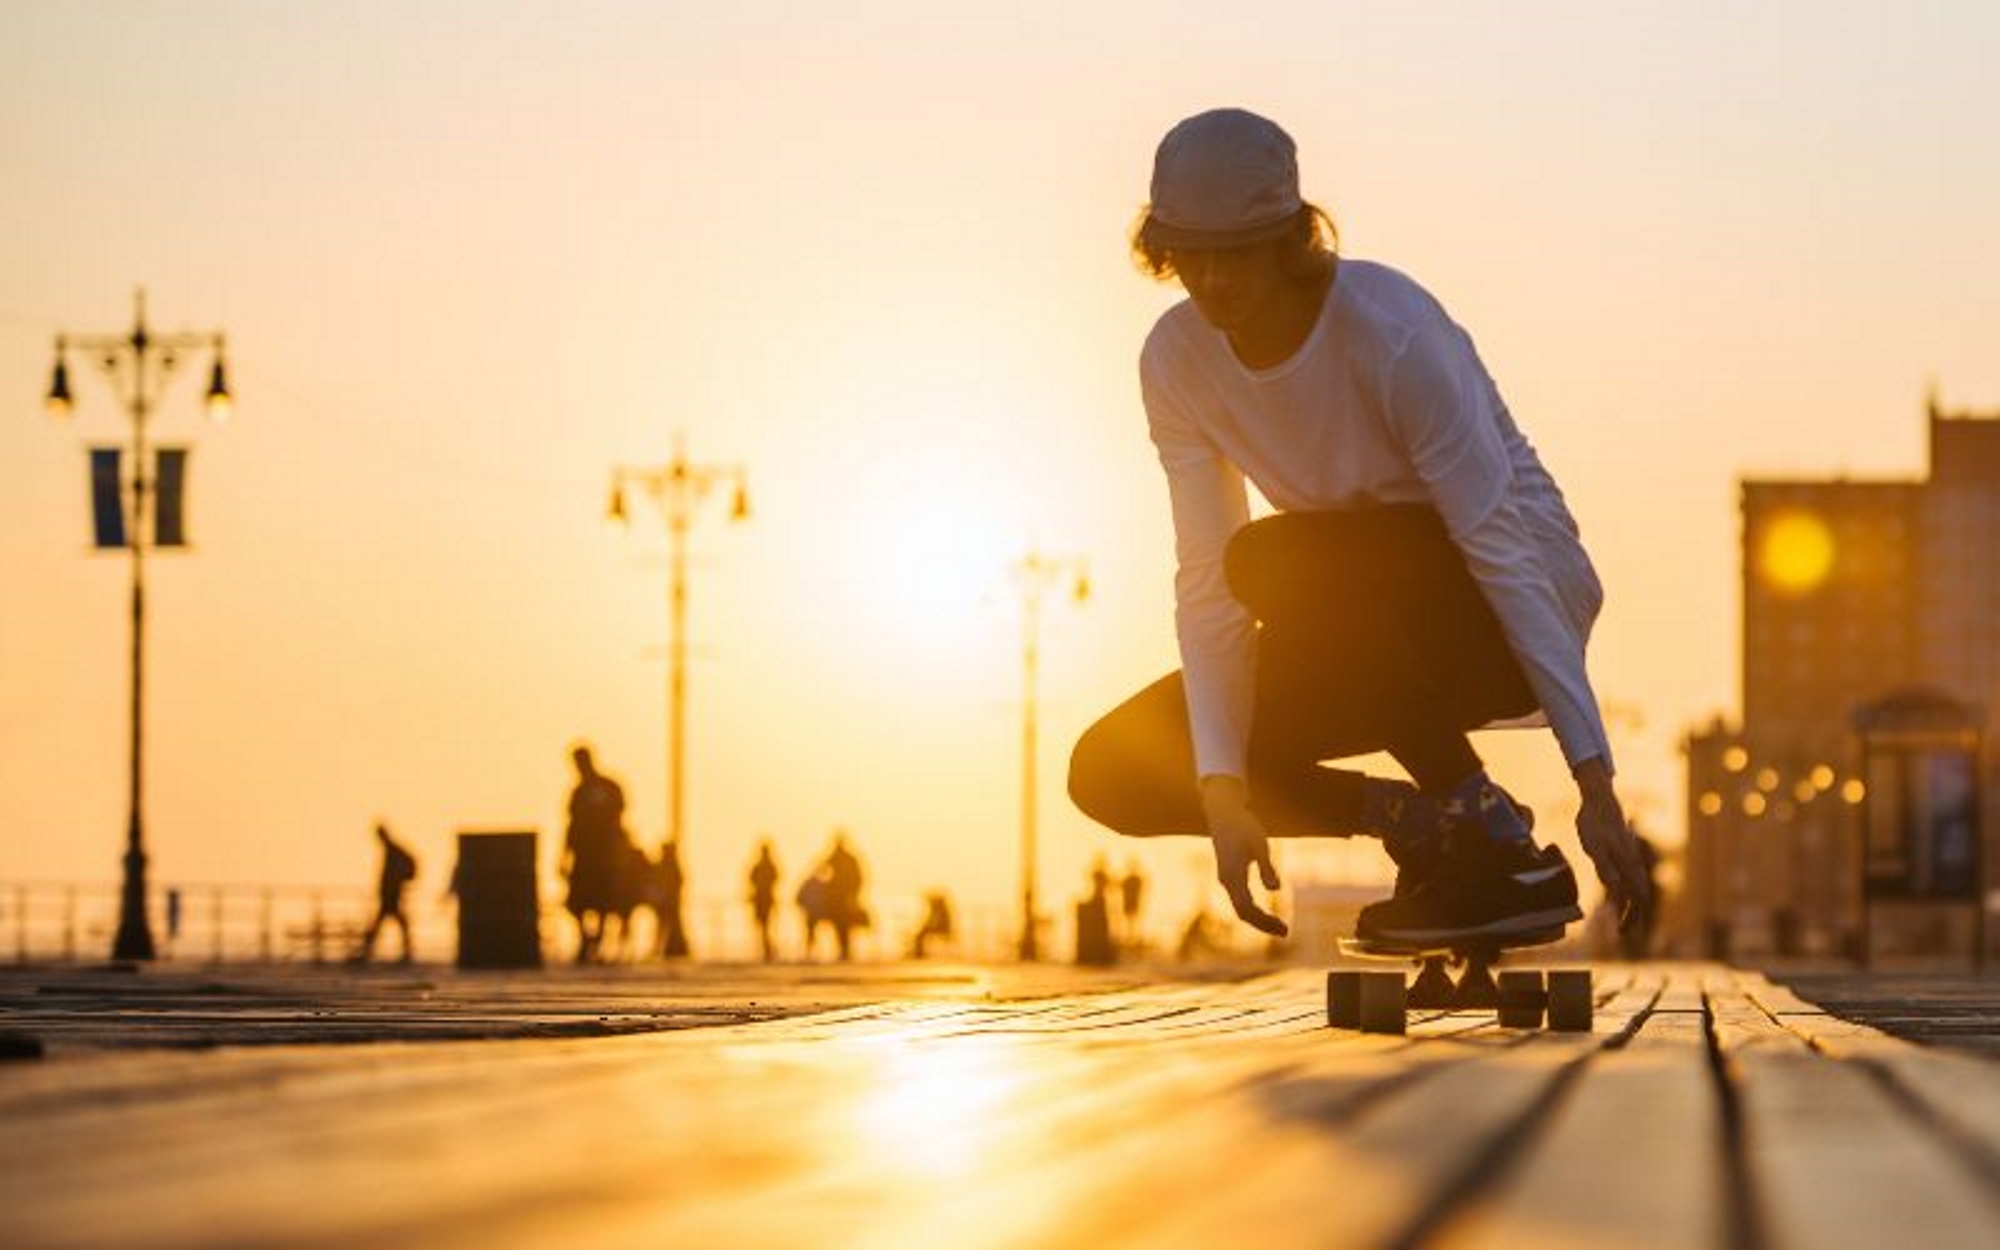 Longboarding sport is good for your mental and physical health